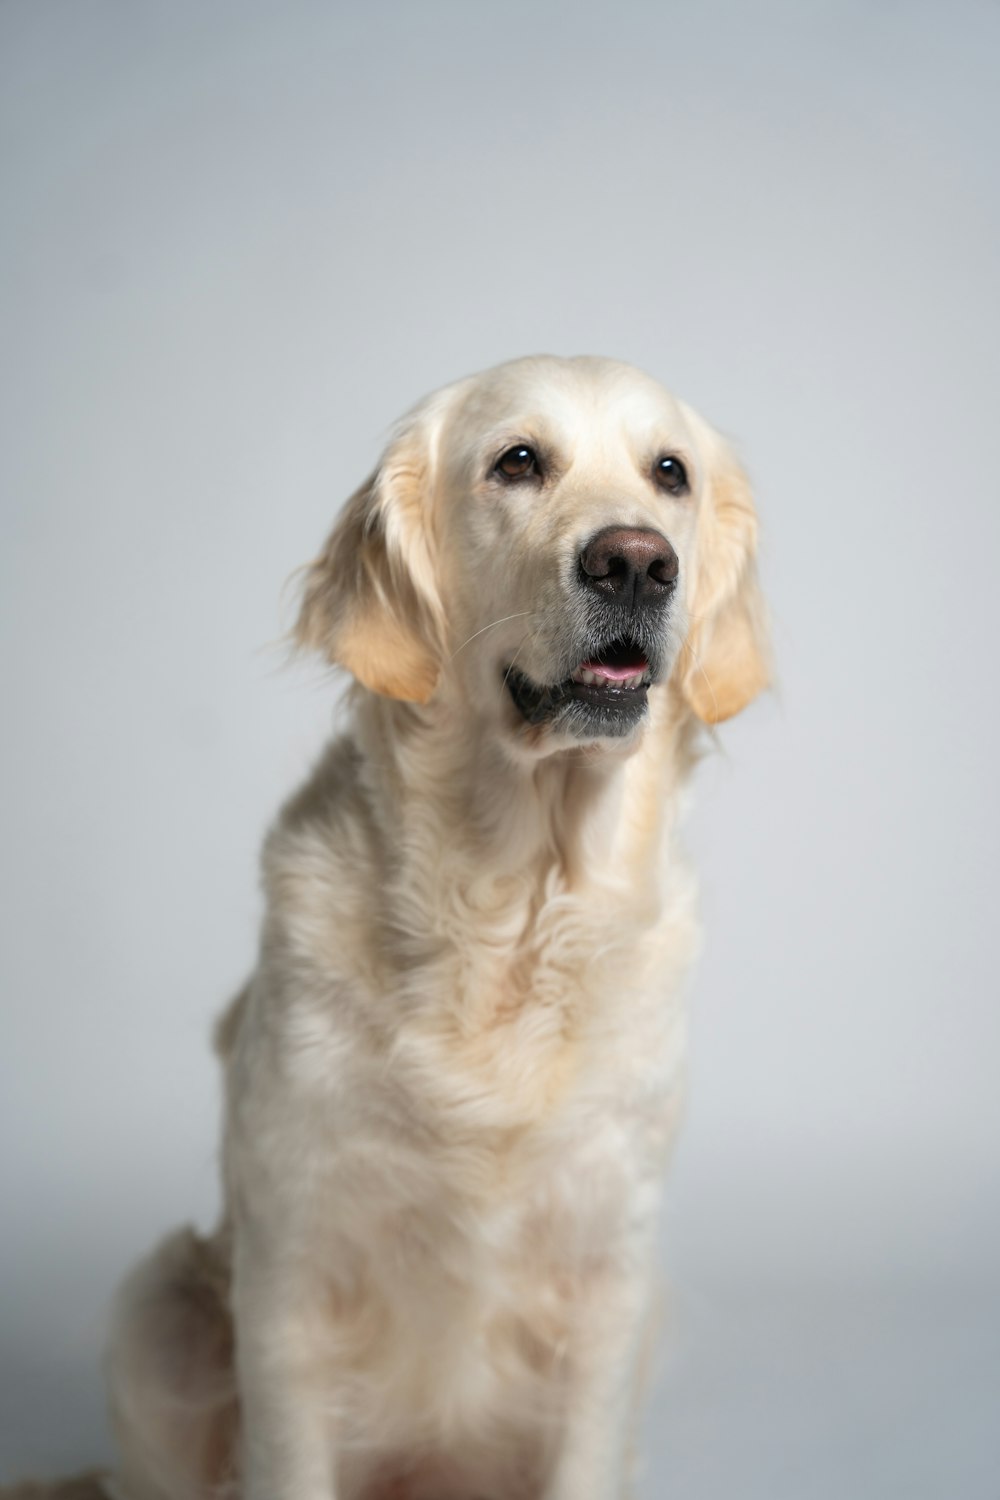  a close up of a dog on a white background